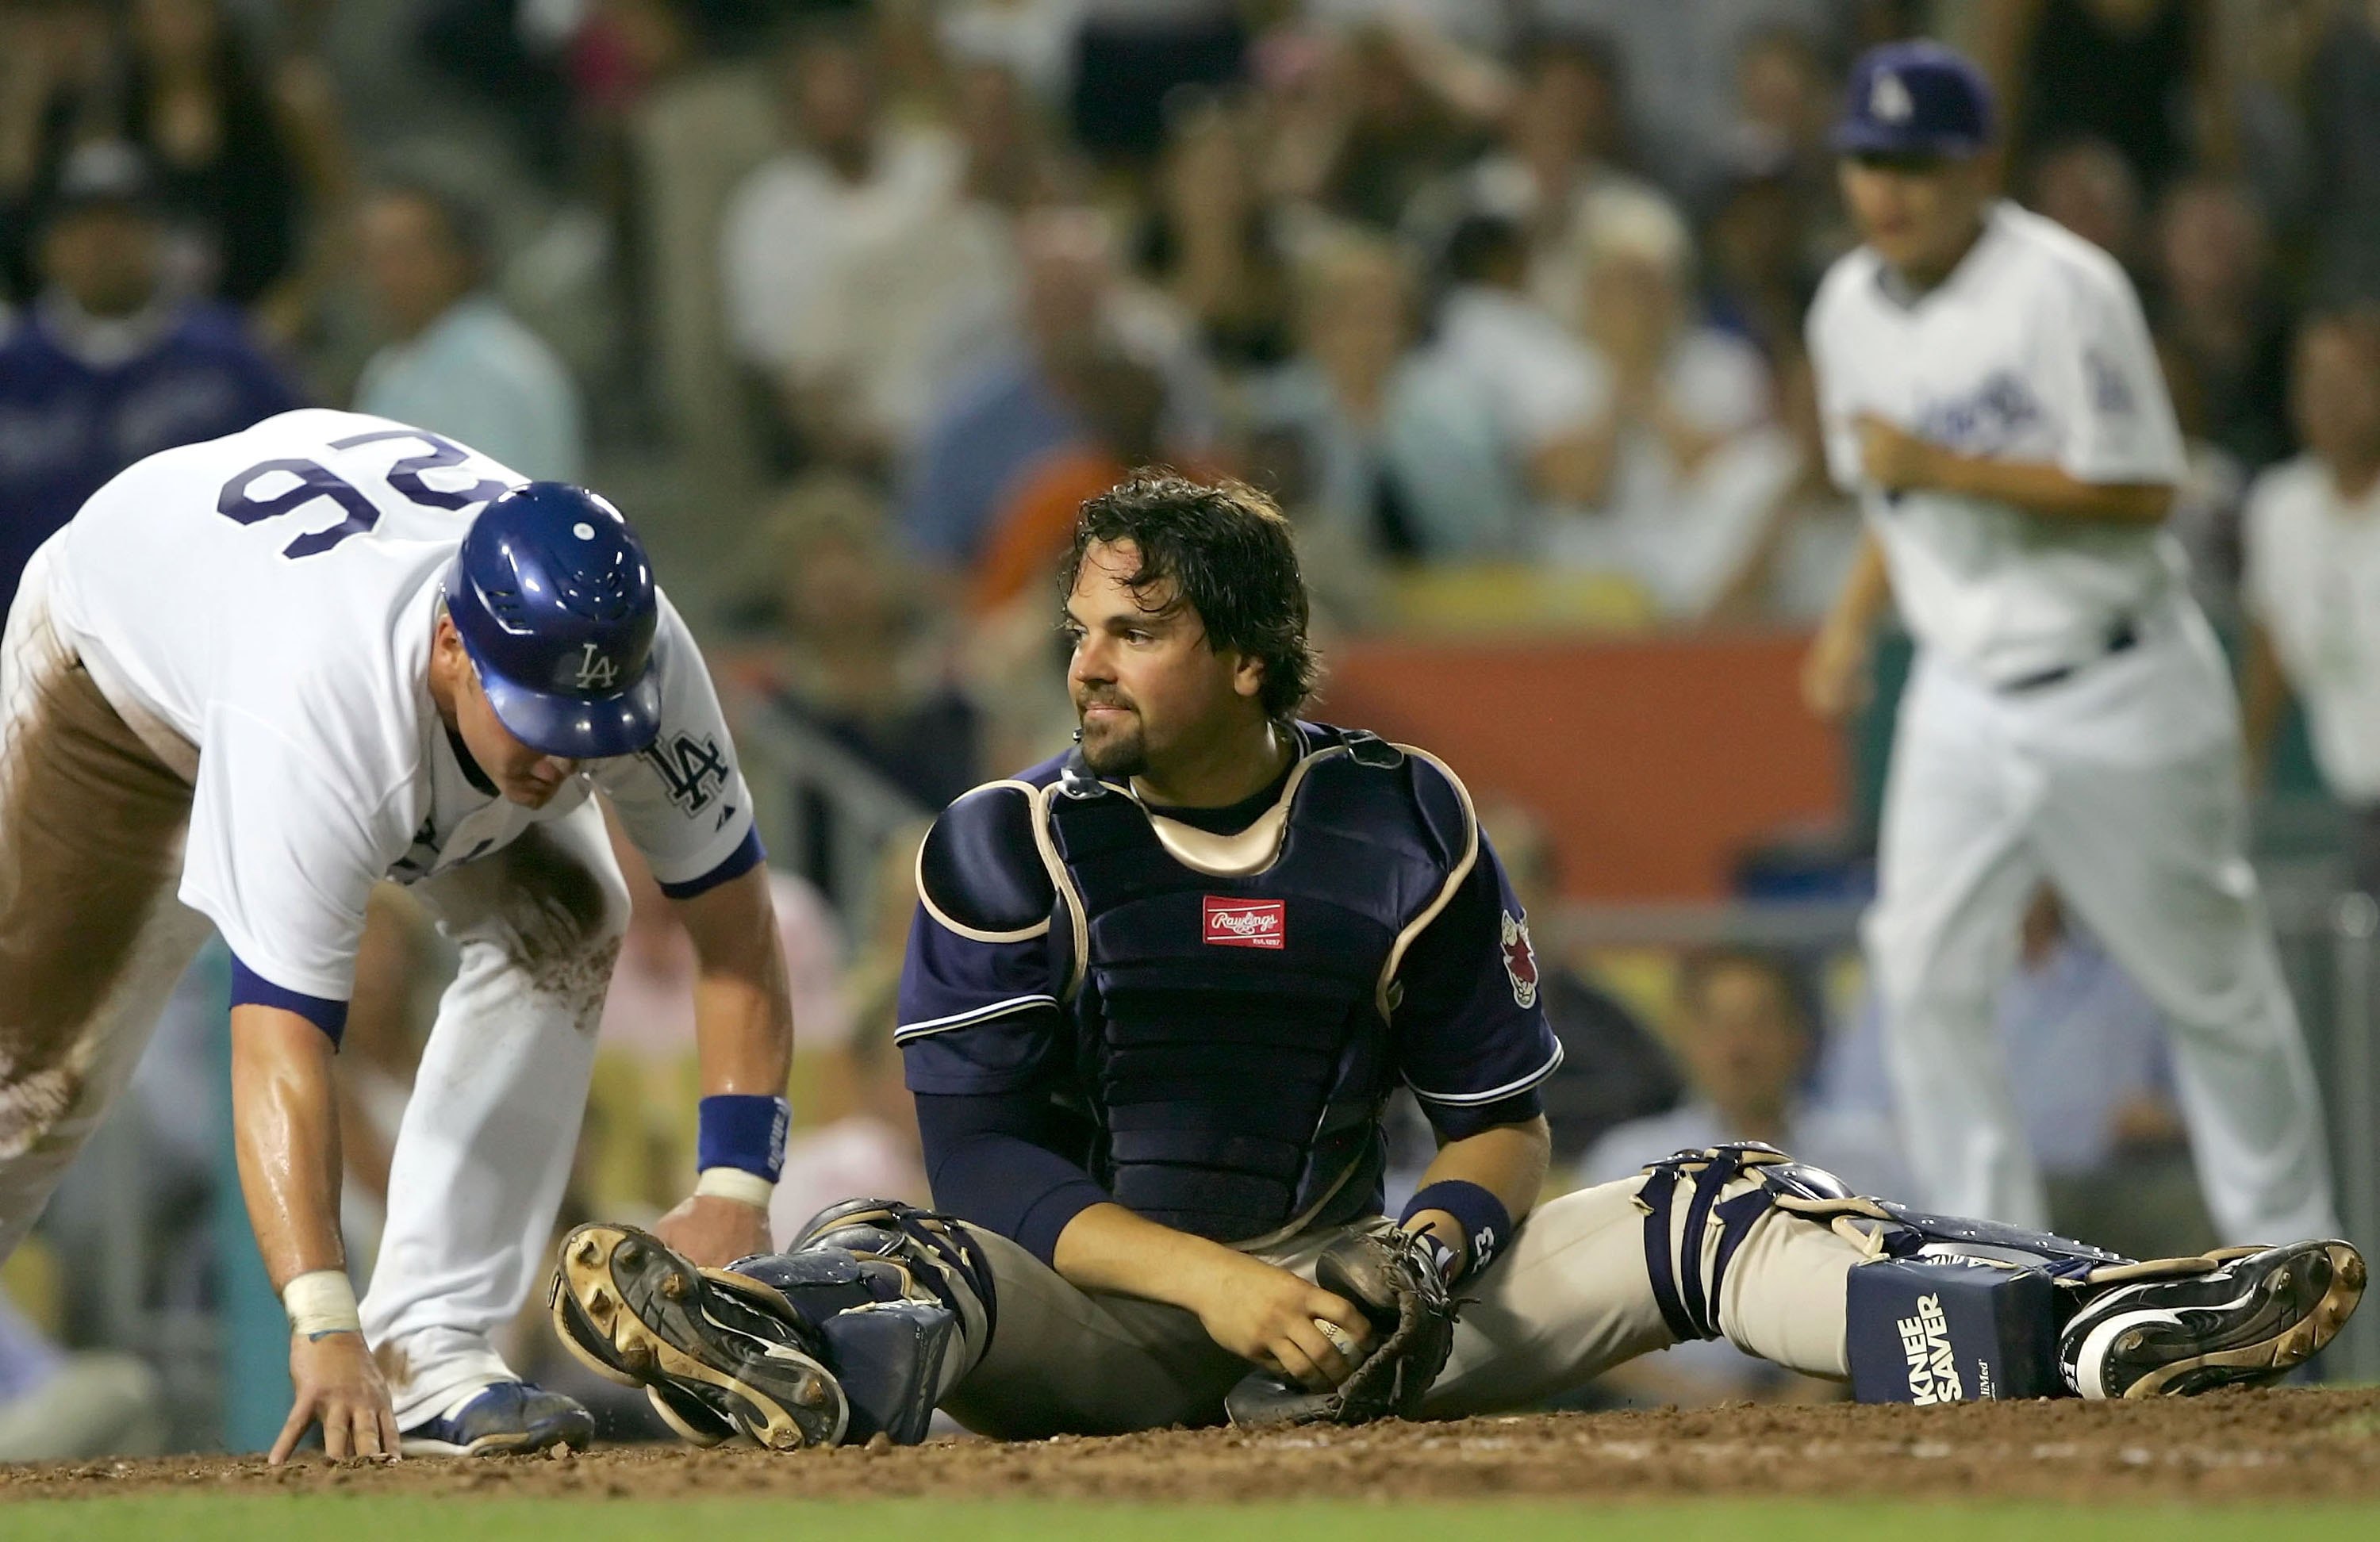 LOS ANGELES - JULY 25:  Mike Piazza #33 of the San Diego Padres sits on homeplate after tagging out Toby Hall #26 of the Los Angeles Dodgers in the sixth inning on July 25, 2006 at Dodger Stadium in Los Angeles, California.  (Photo by Lisa Blumenfeld/Gett